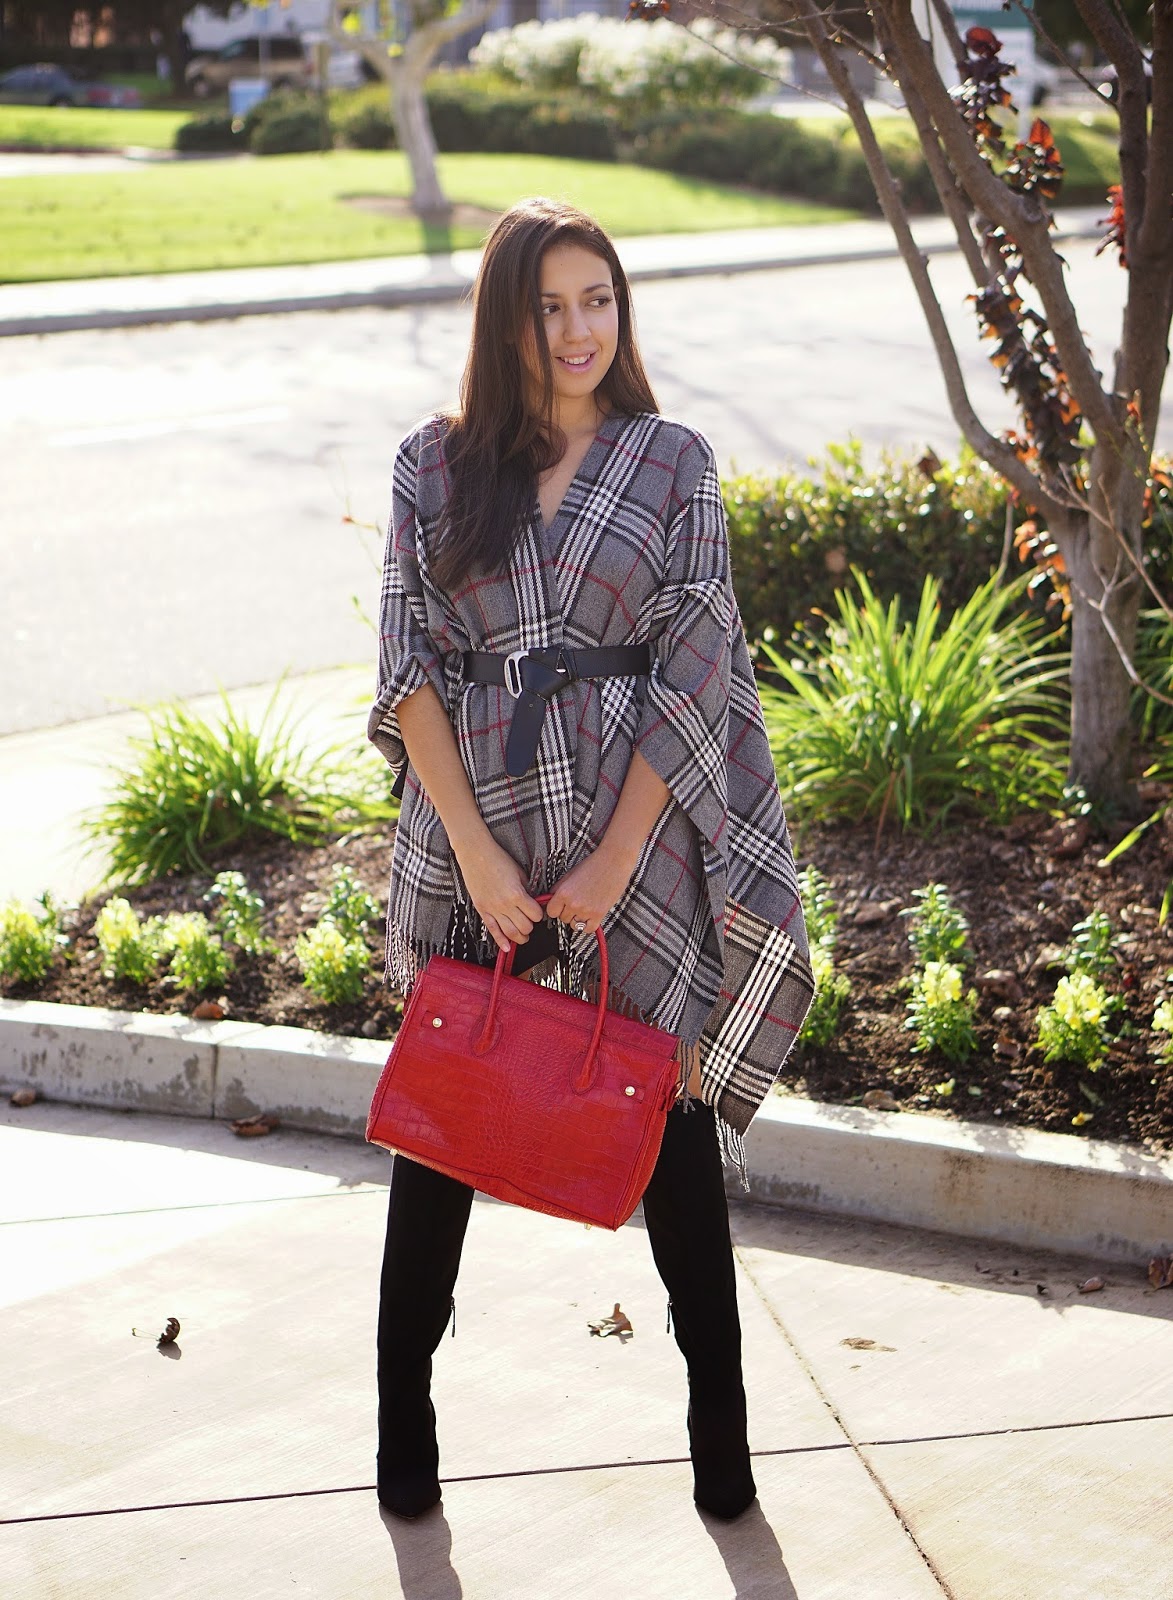 Black Knee High Boots, Blanket Fashion, Cape, Plaid Blanket, Plaid Cape, Plaid Wrap, Wrap, JCPenney Plaid Wrap, Black Skort, Express Skort, Forever 21 Knee High Boots, Vamilla Paris Bertie Bag, How to wear a wrap for fall, Red Bag, Hermes Inspired Bag, 